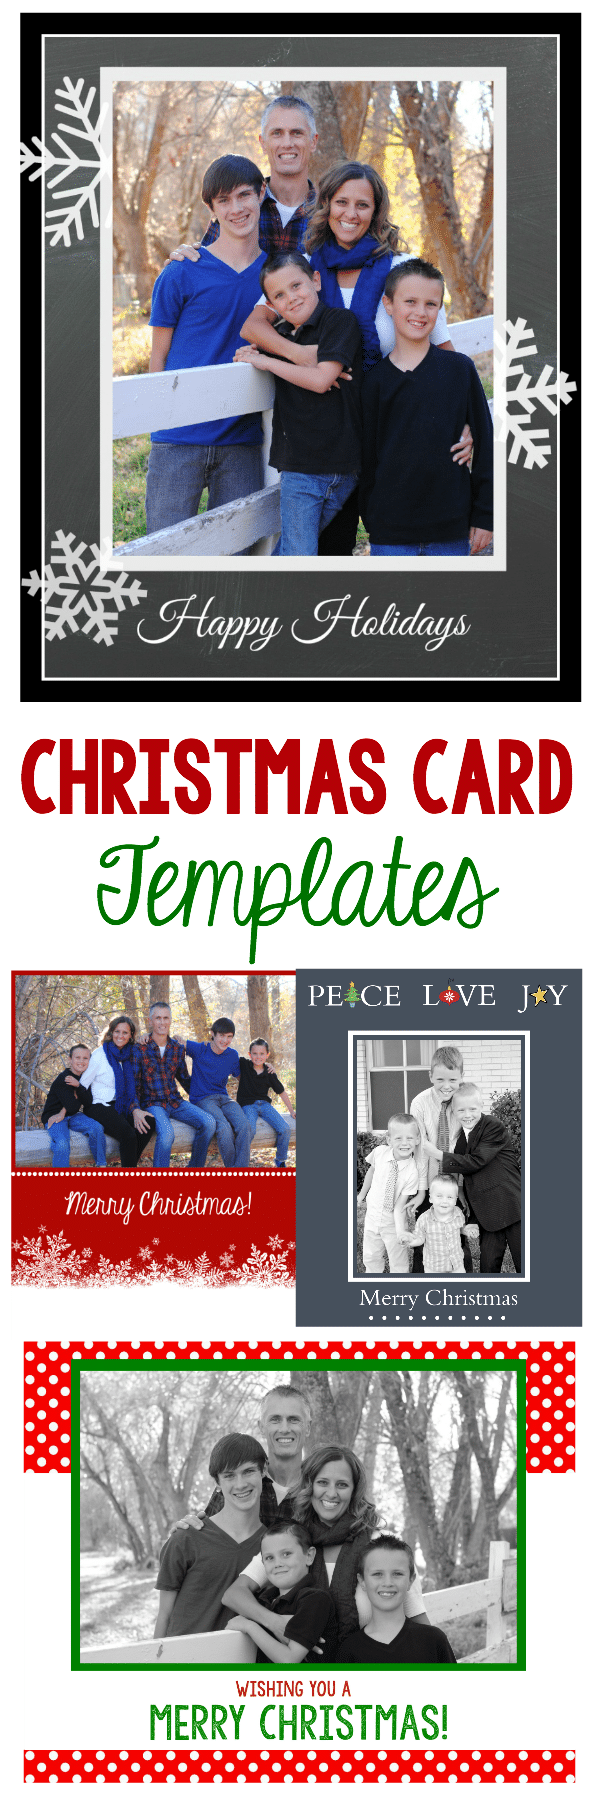 free photo templates for christmas cards